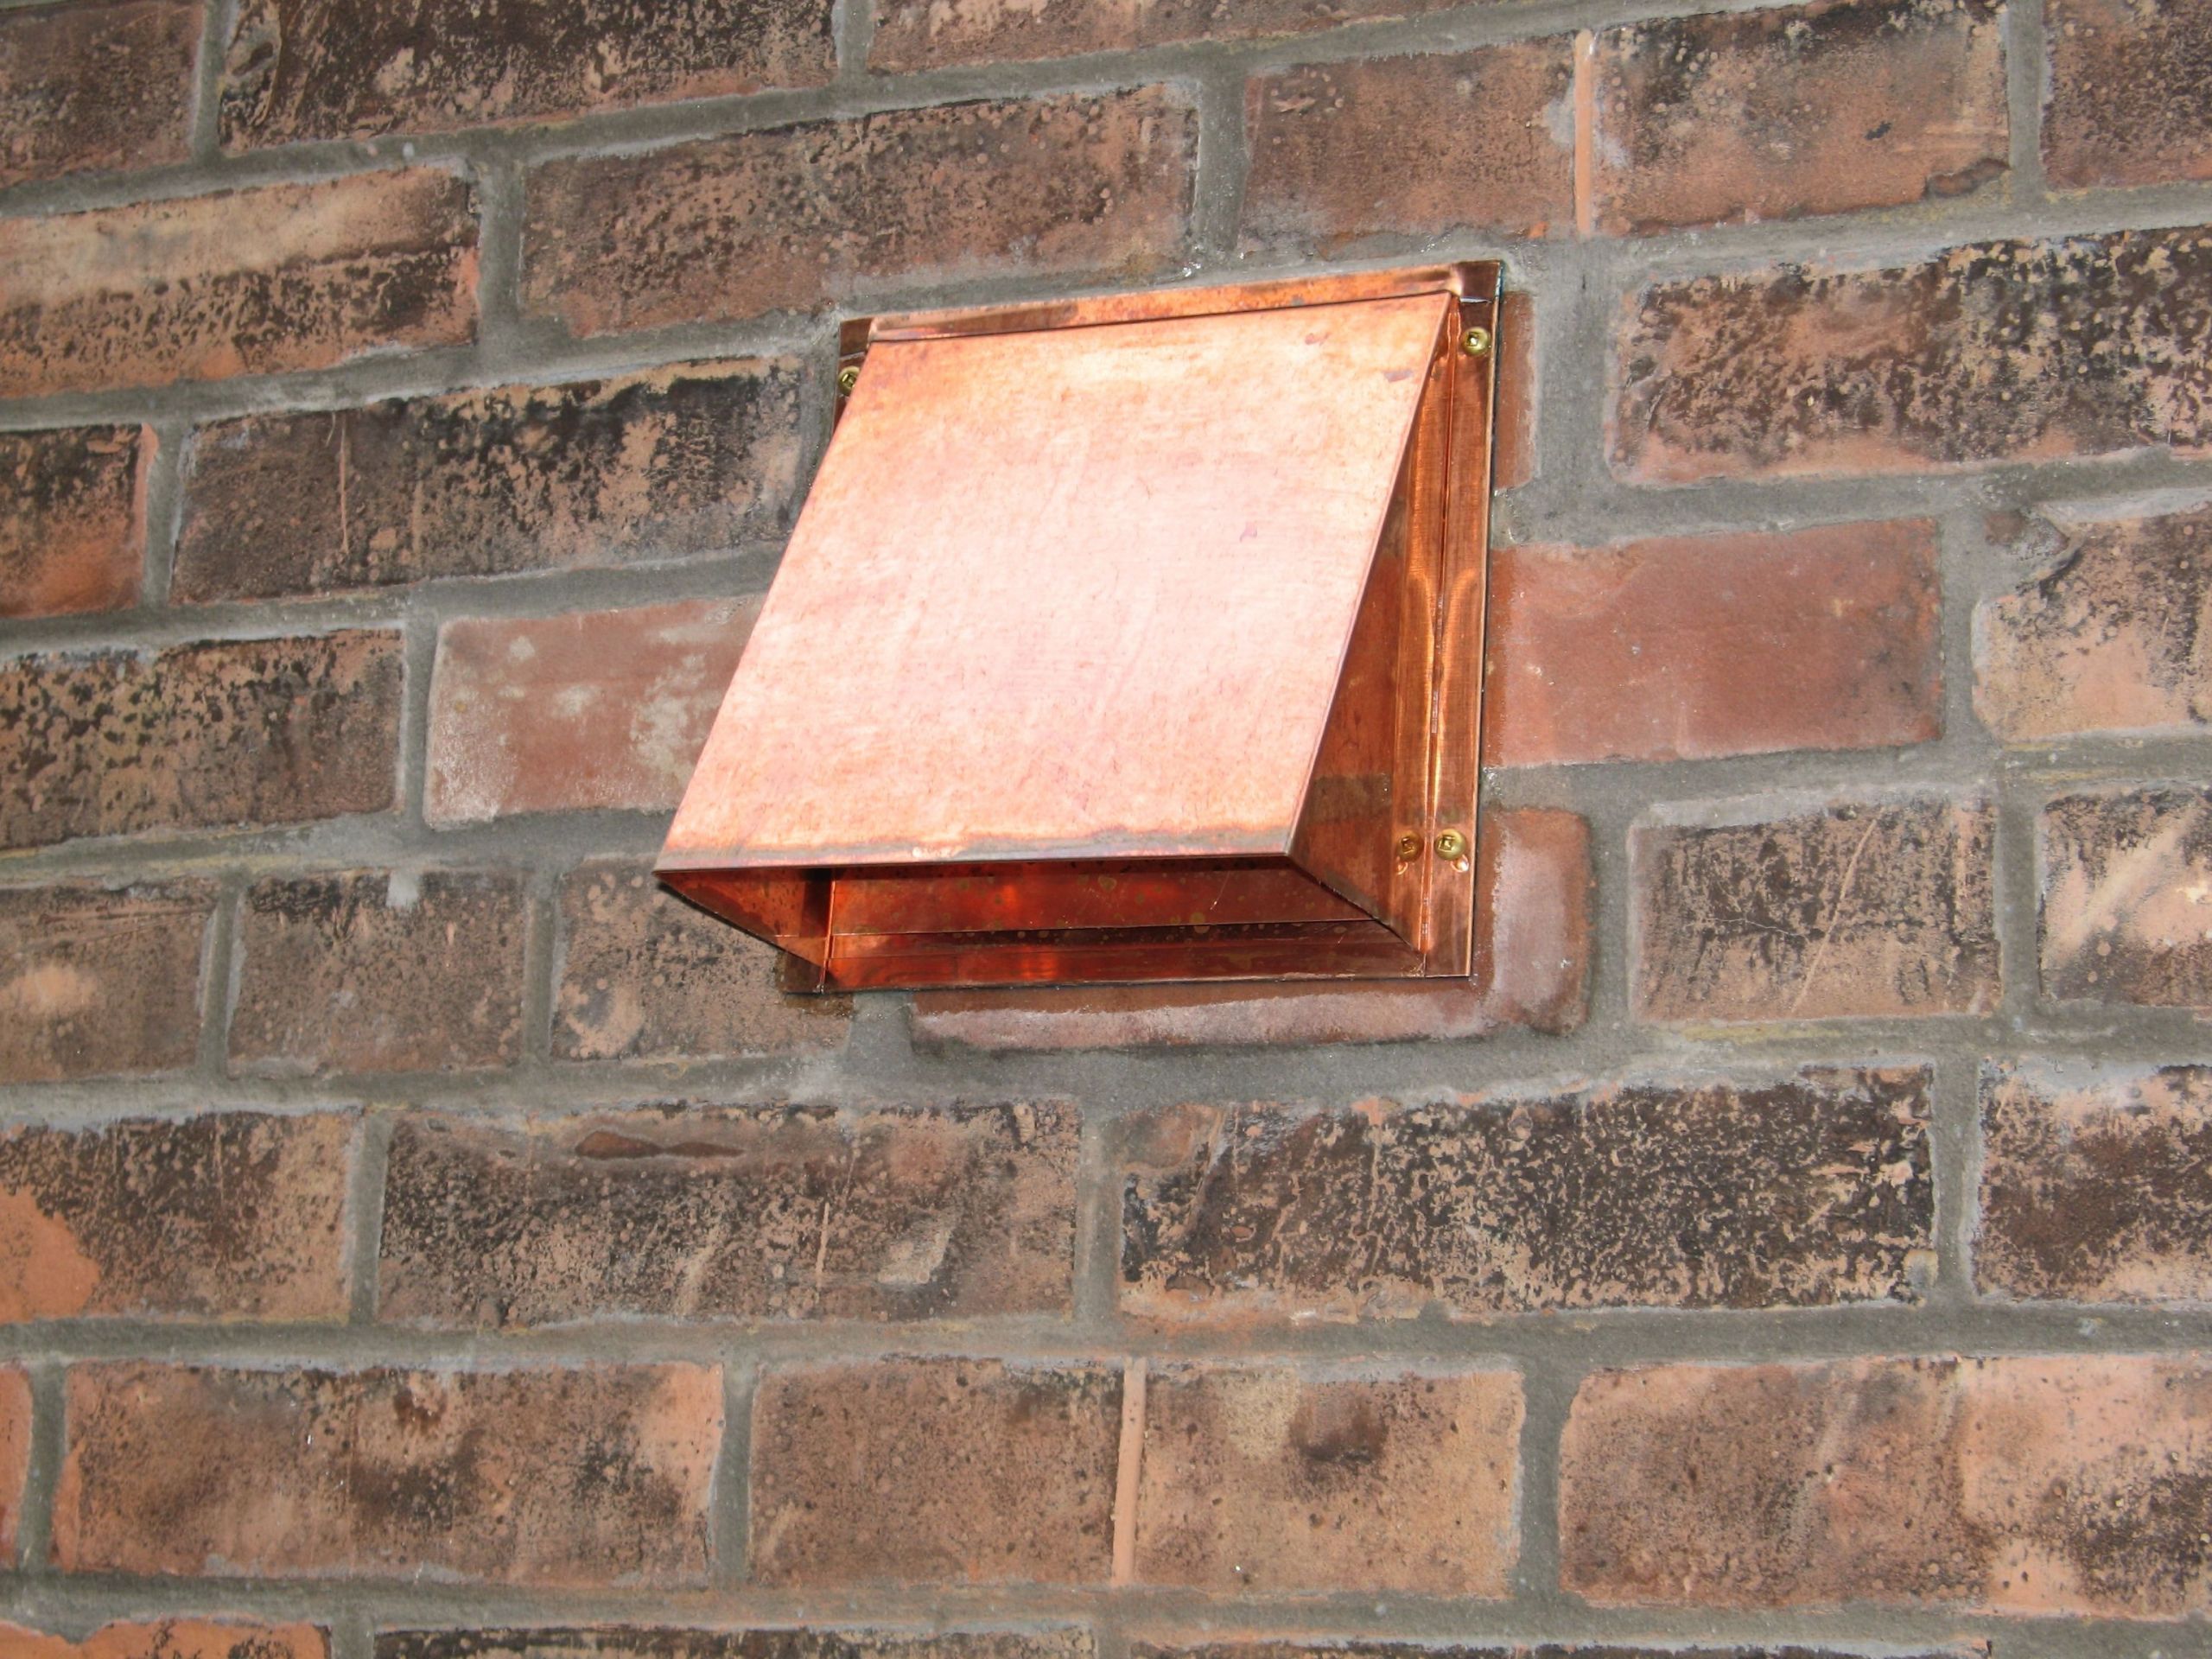 Bathroom Exhaust Fan Exterior Cover
 Outside Vent For Bathroom Fan